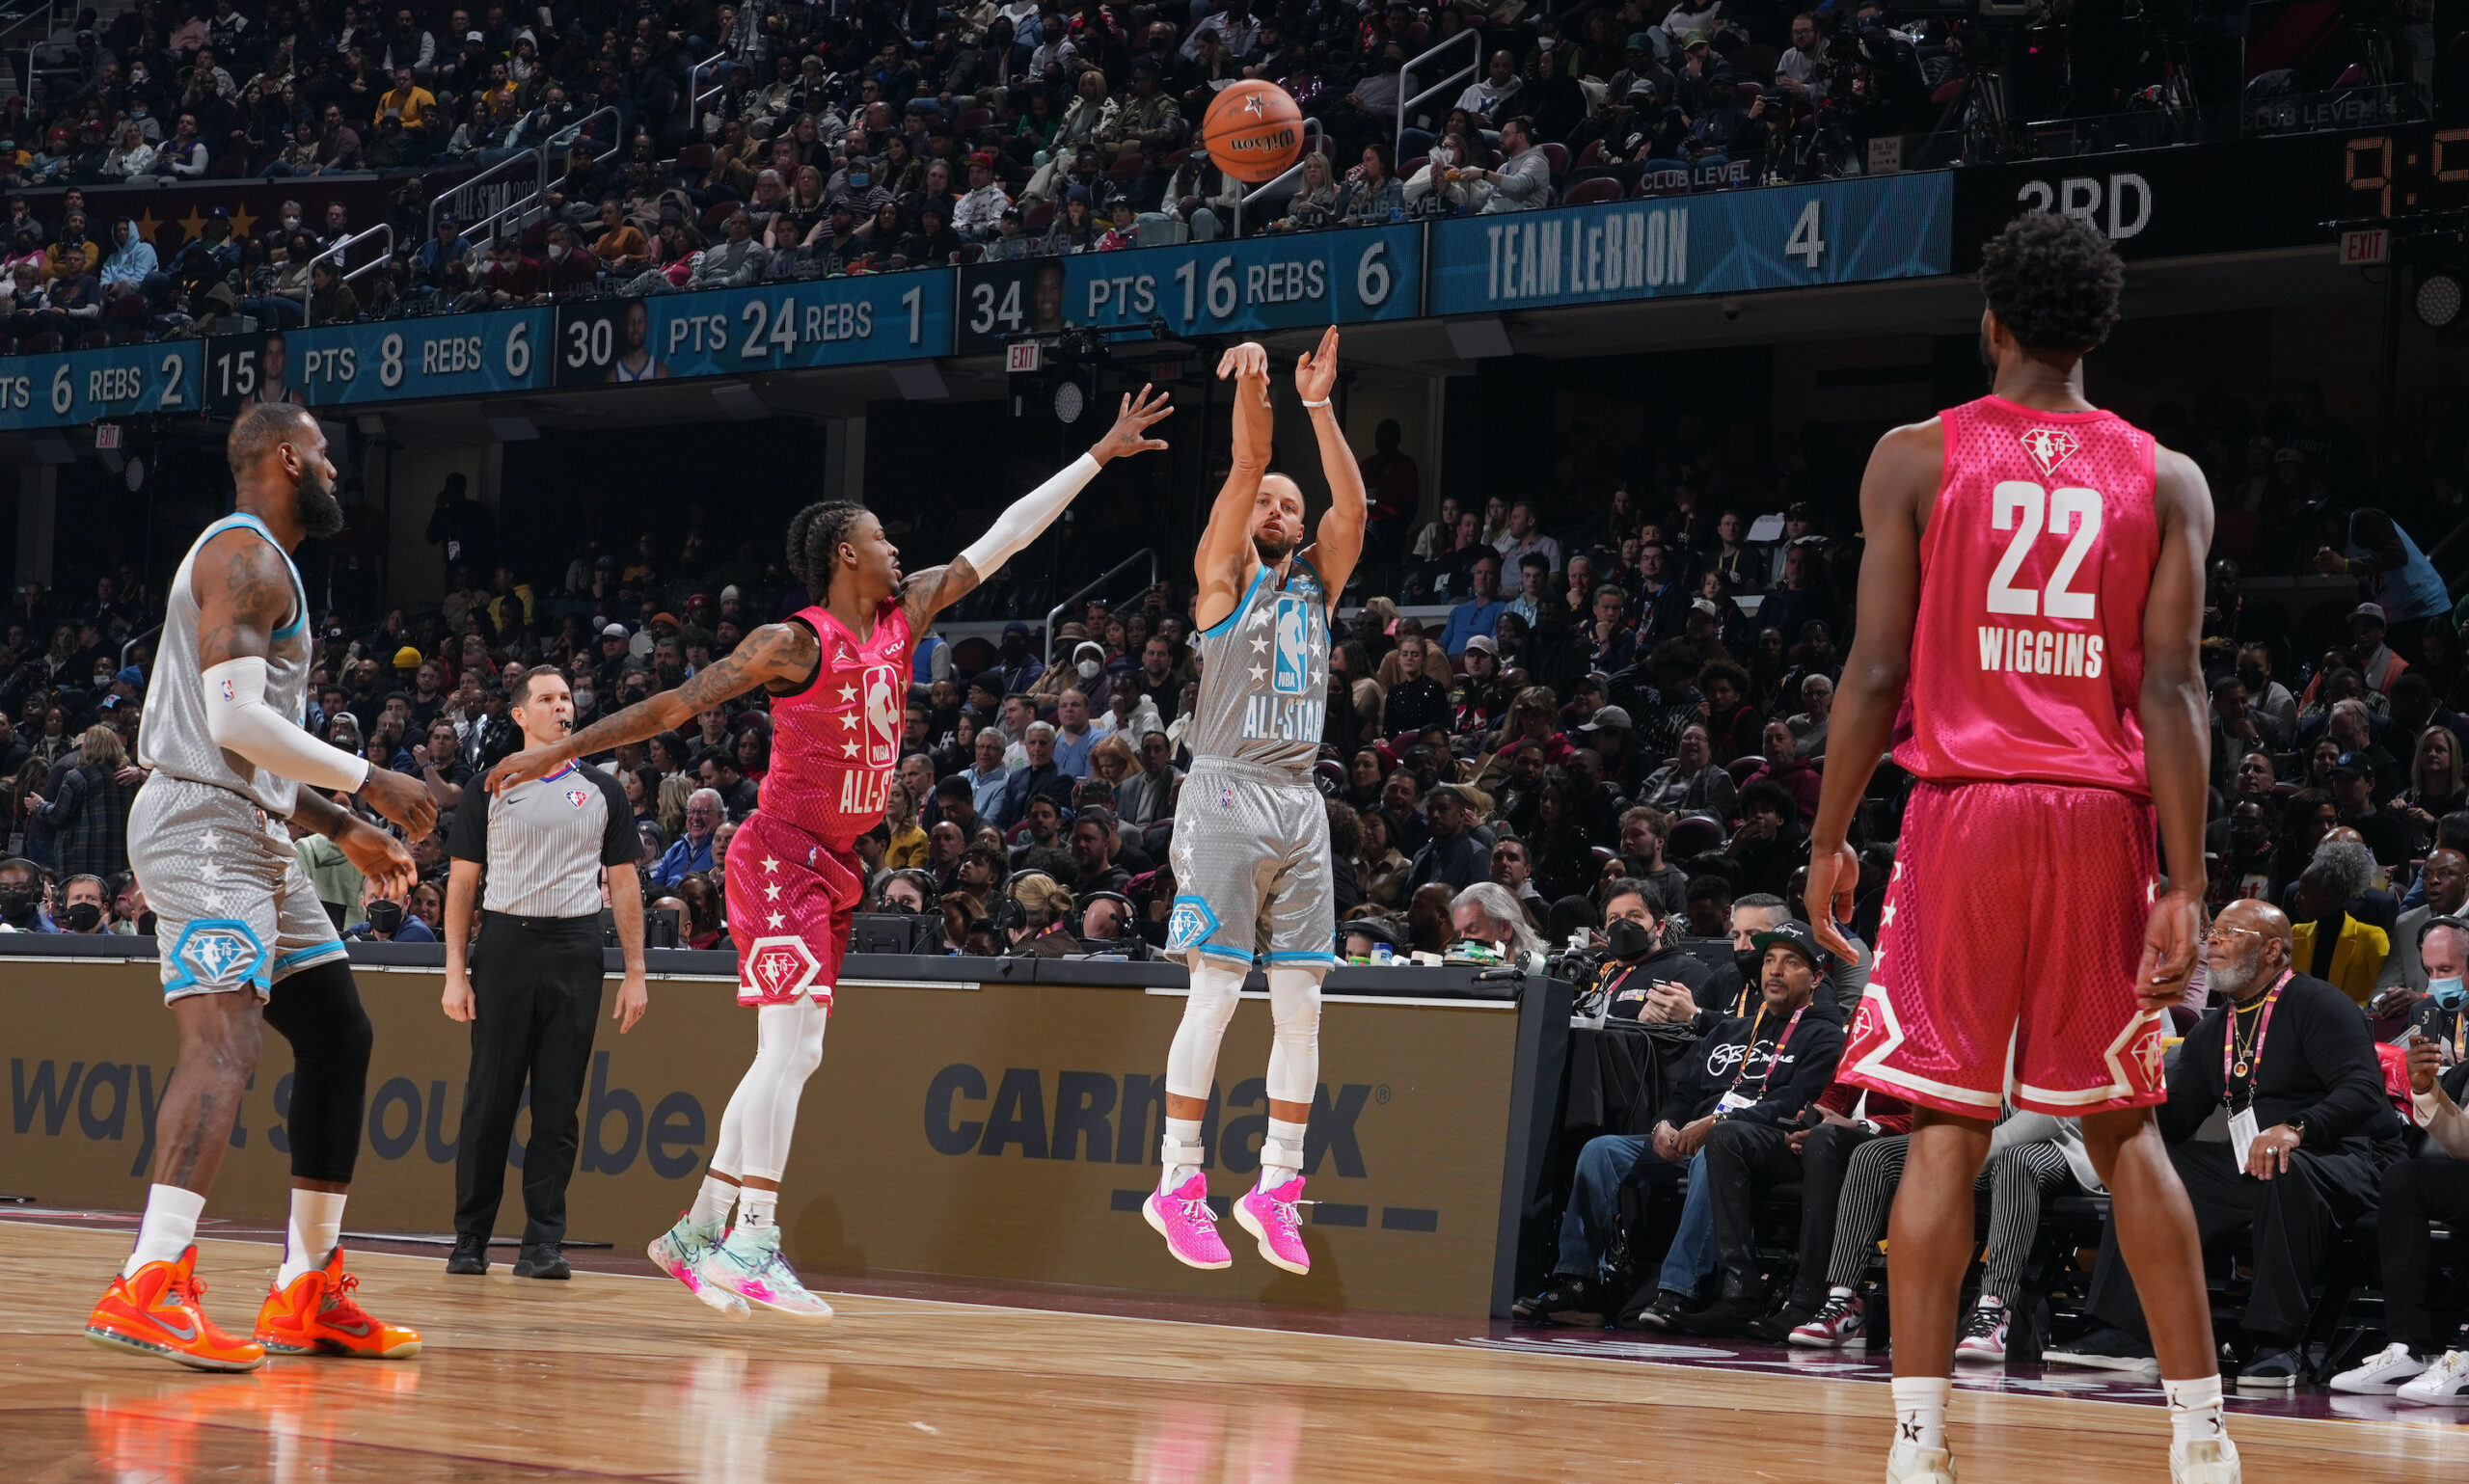 Stephen Curry Puts On Show, Shatters Records With All Star 3 Point Barrage